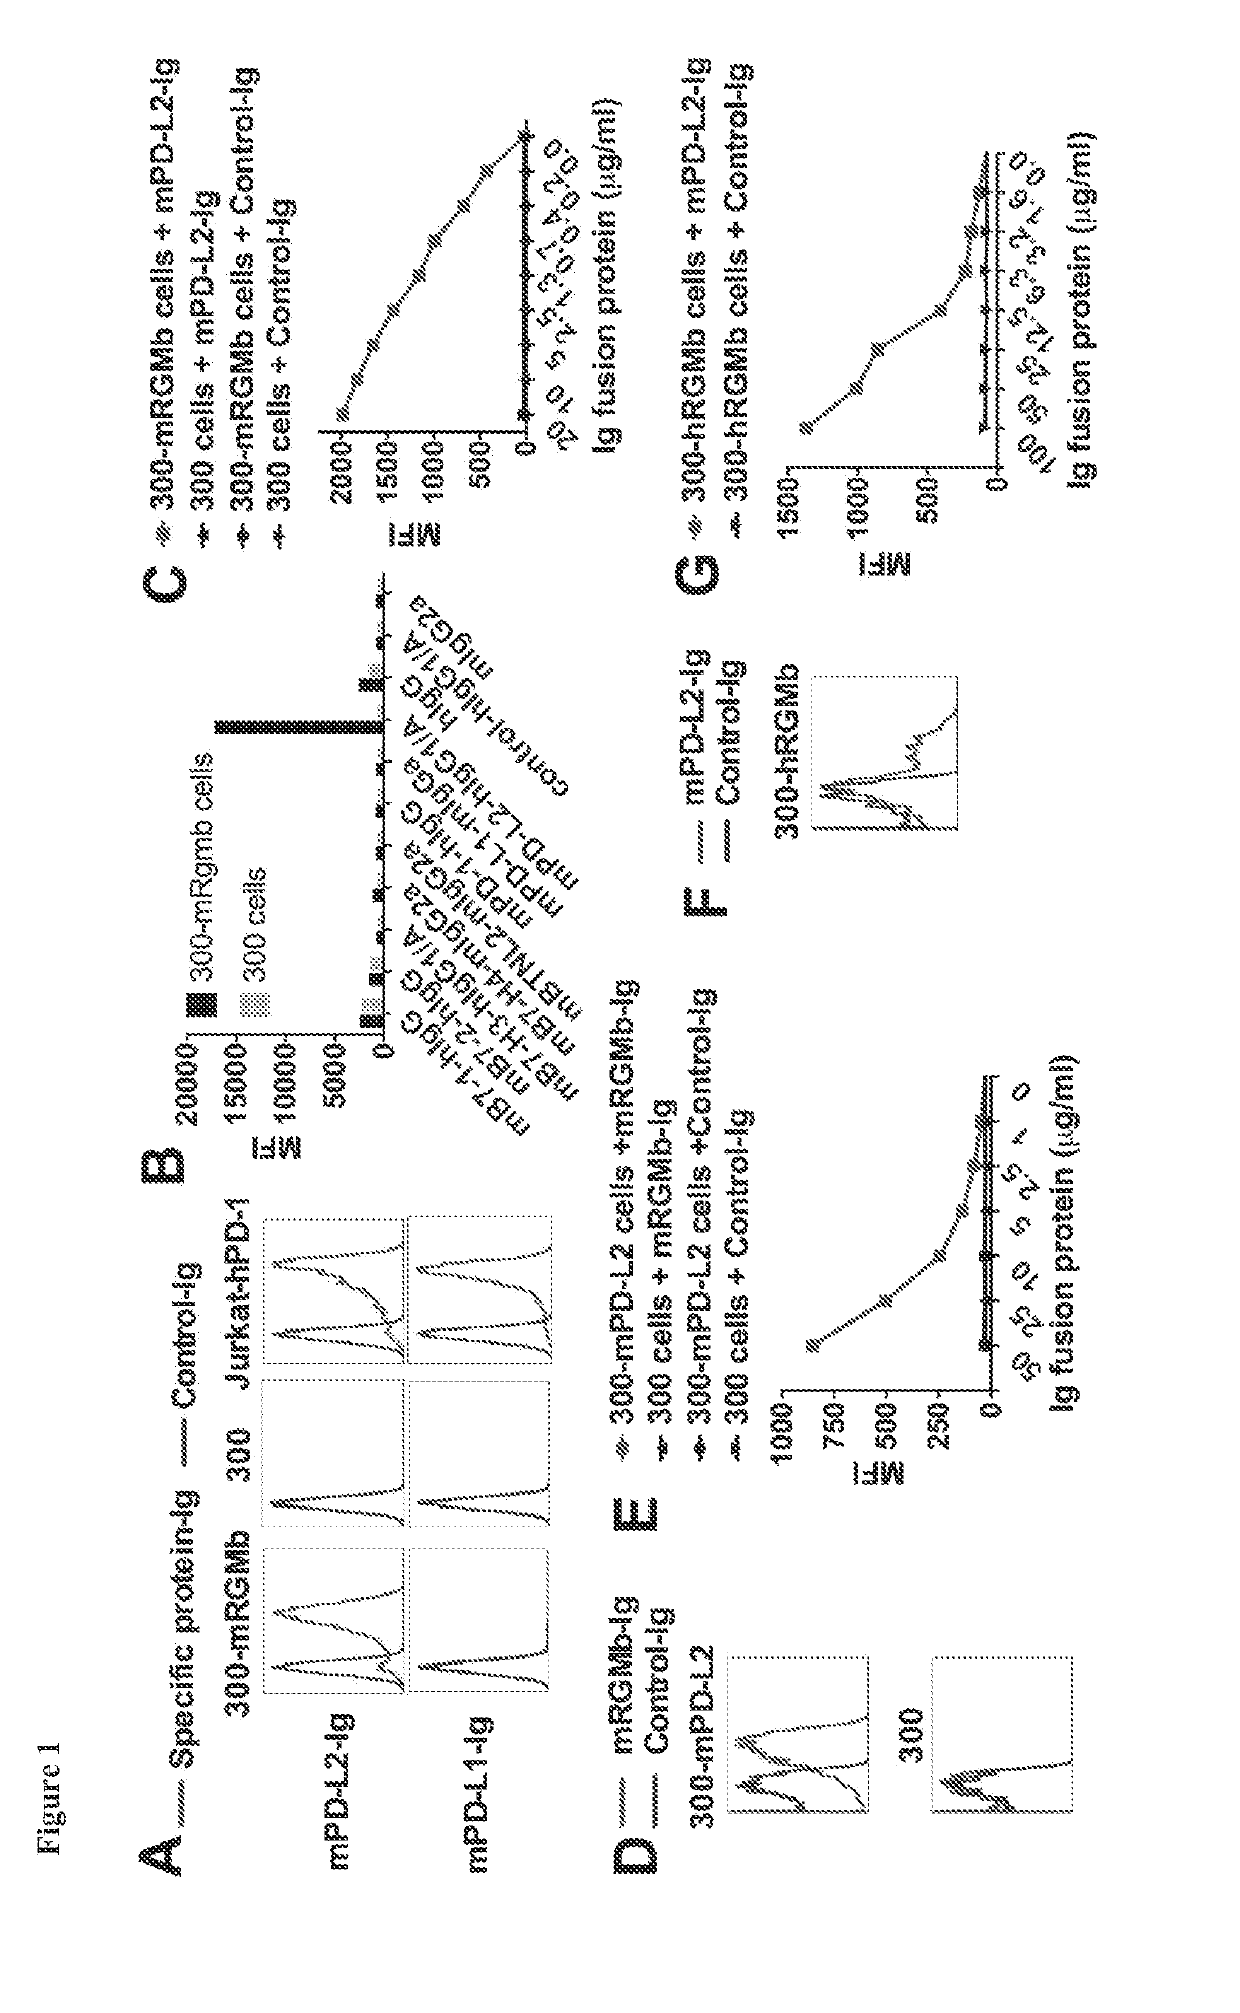 Agents that modulate immune cell activation and methods of use thereof